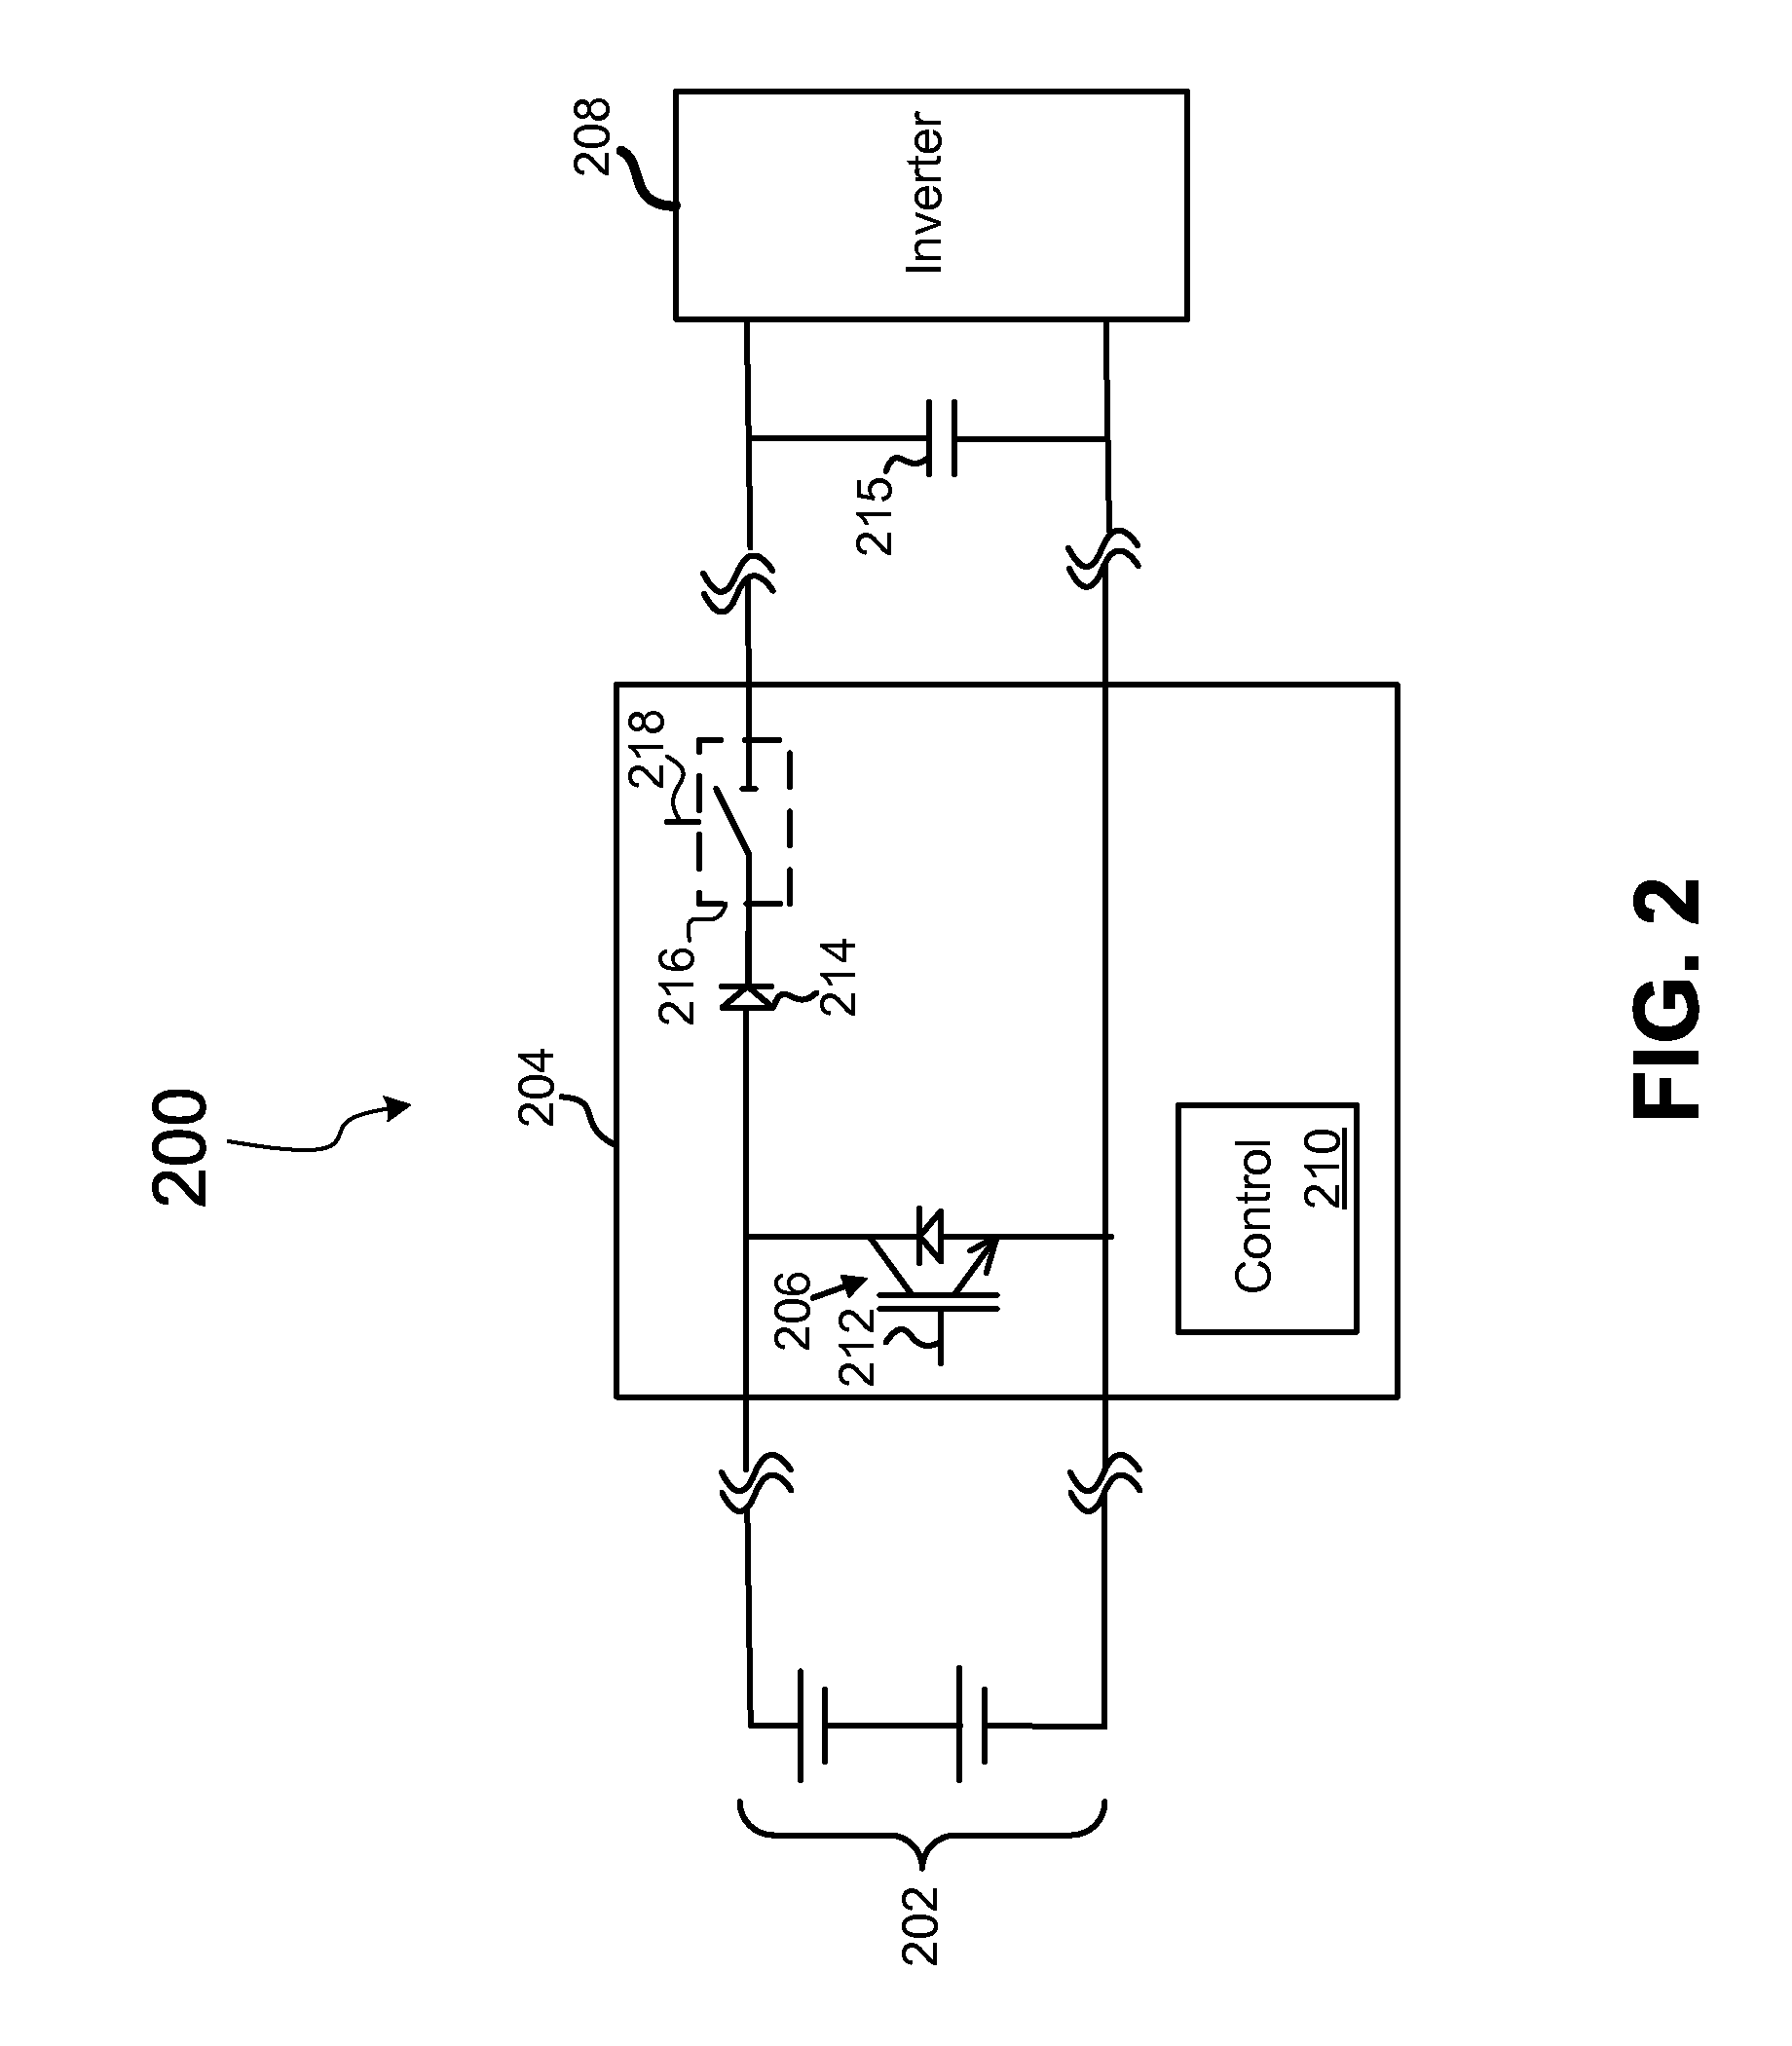 Photovoltaic inverter interface device, system, and method